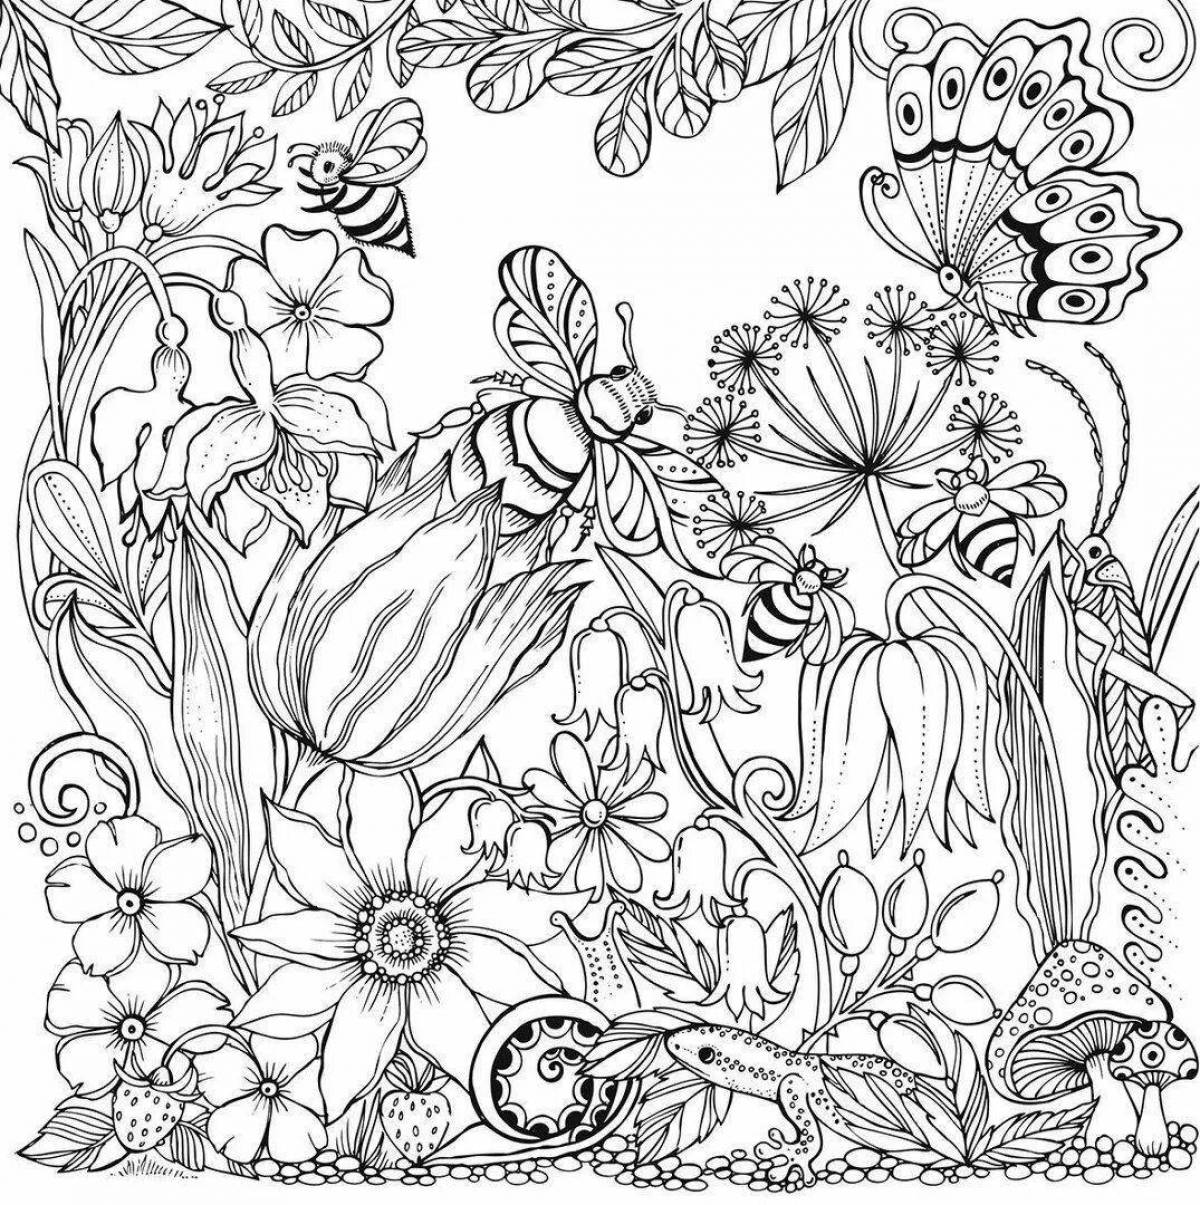 Radiant coloring page flower mood relax